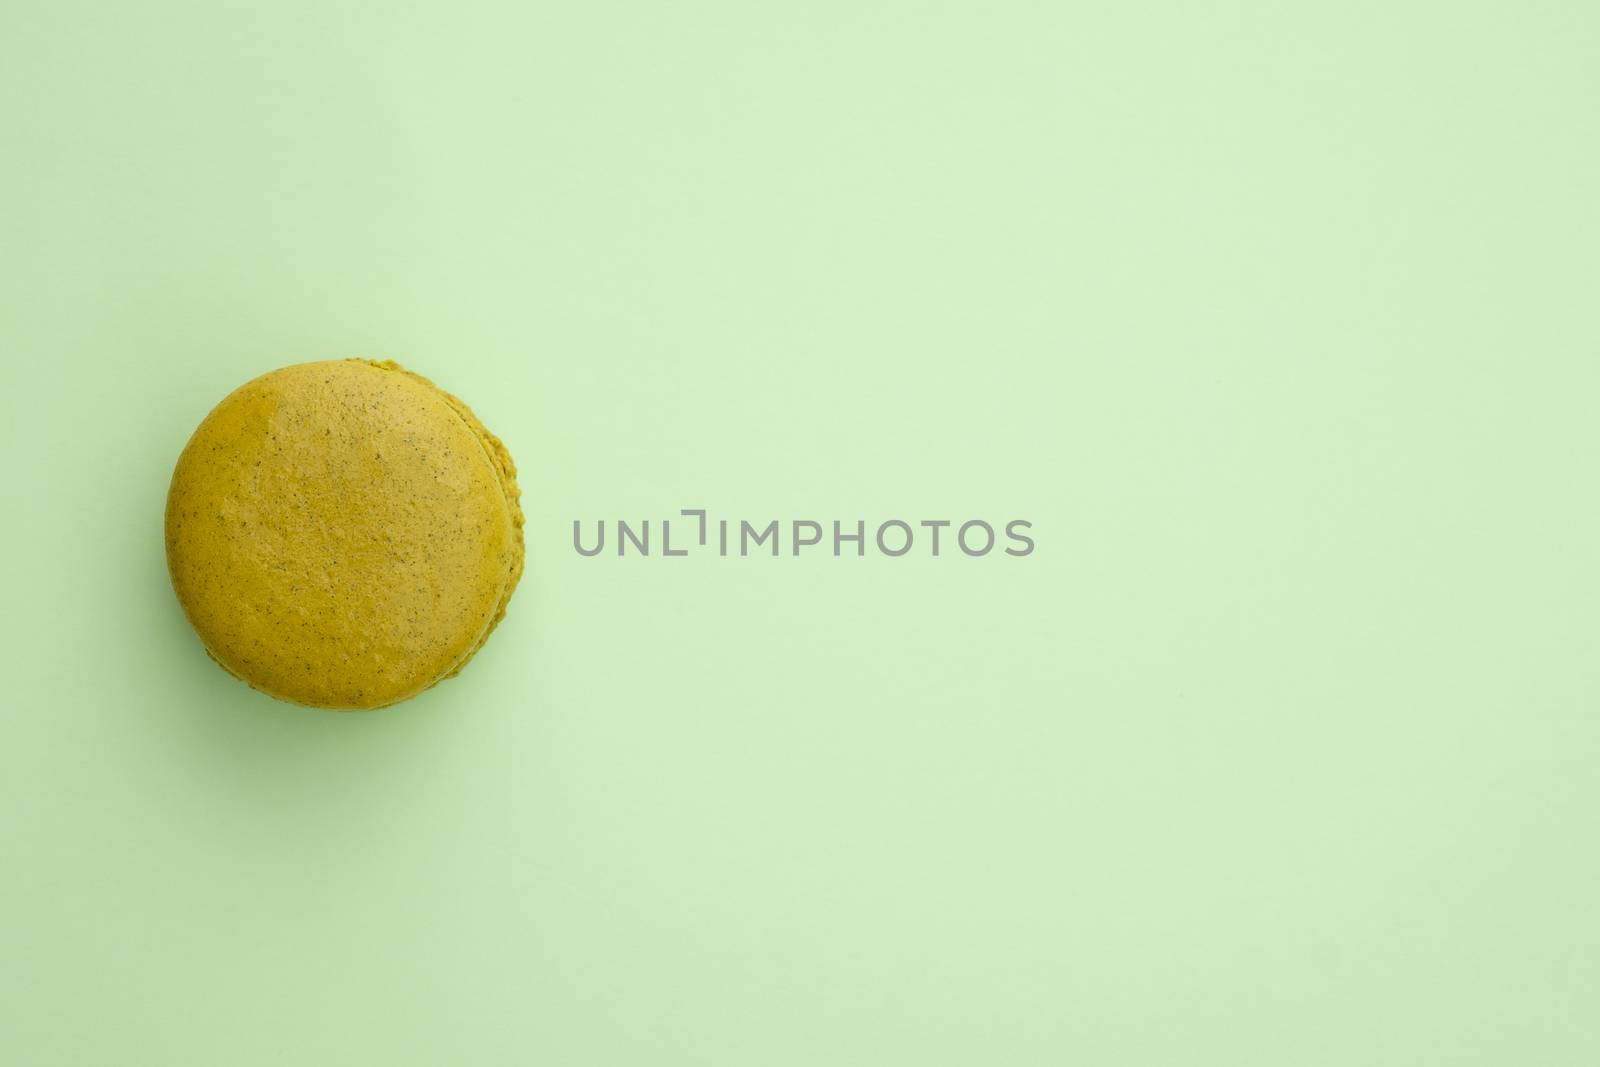 Macaroon on a green background. Top view, Space to write at right.